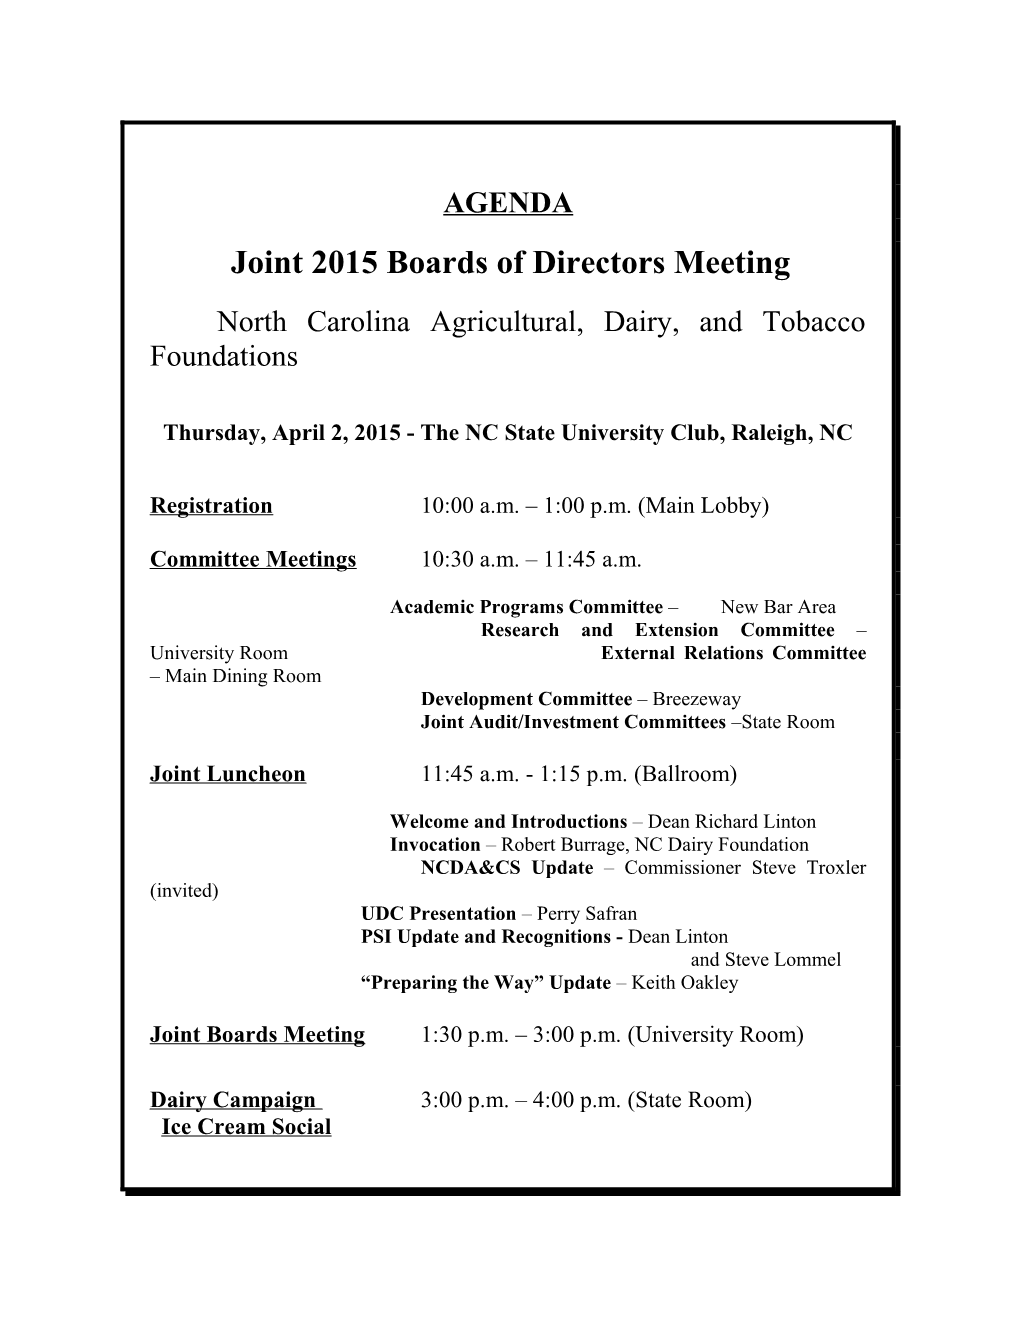 Joint 2015 Boards of Directors Meeting